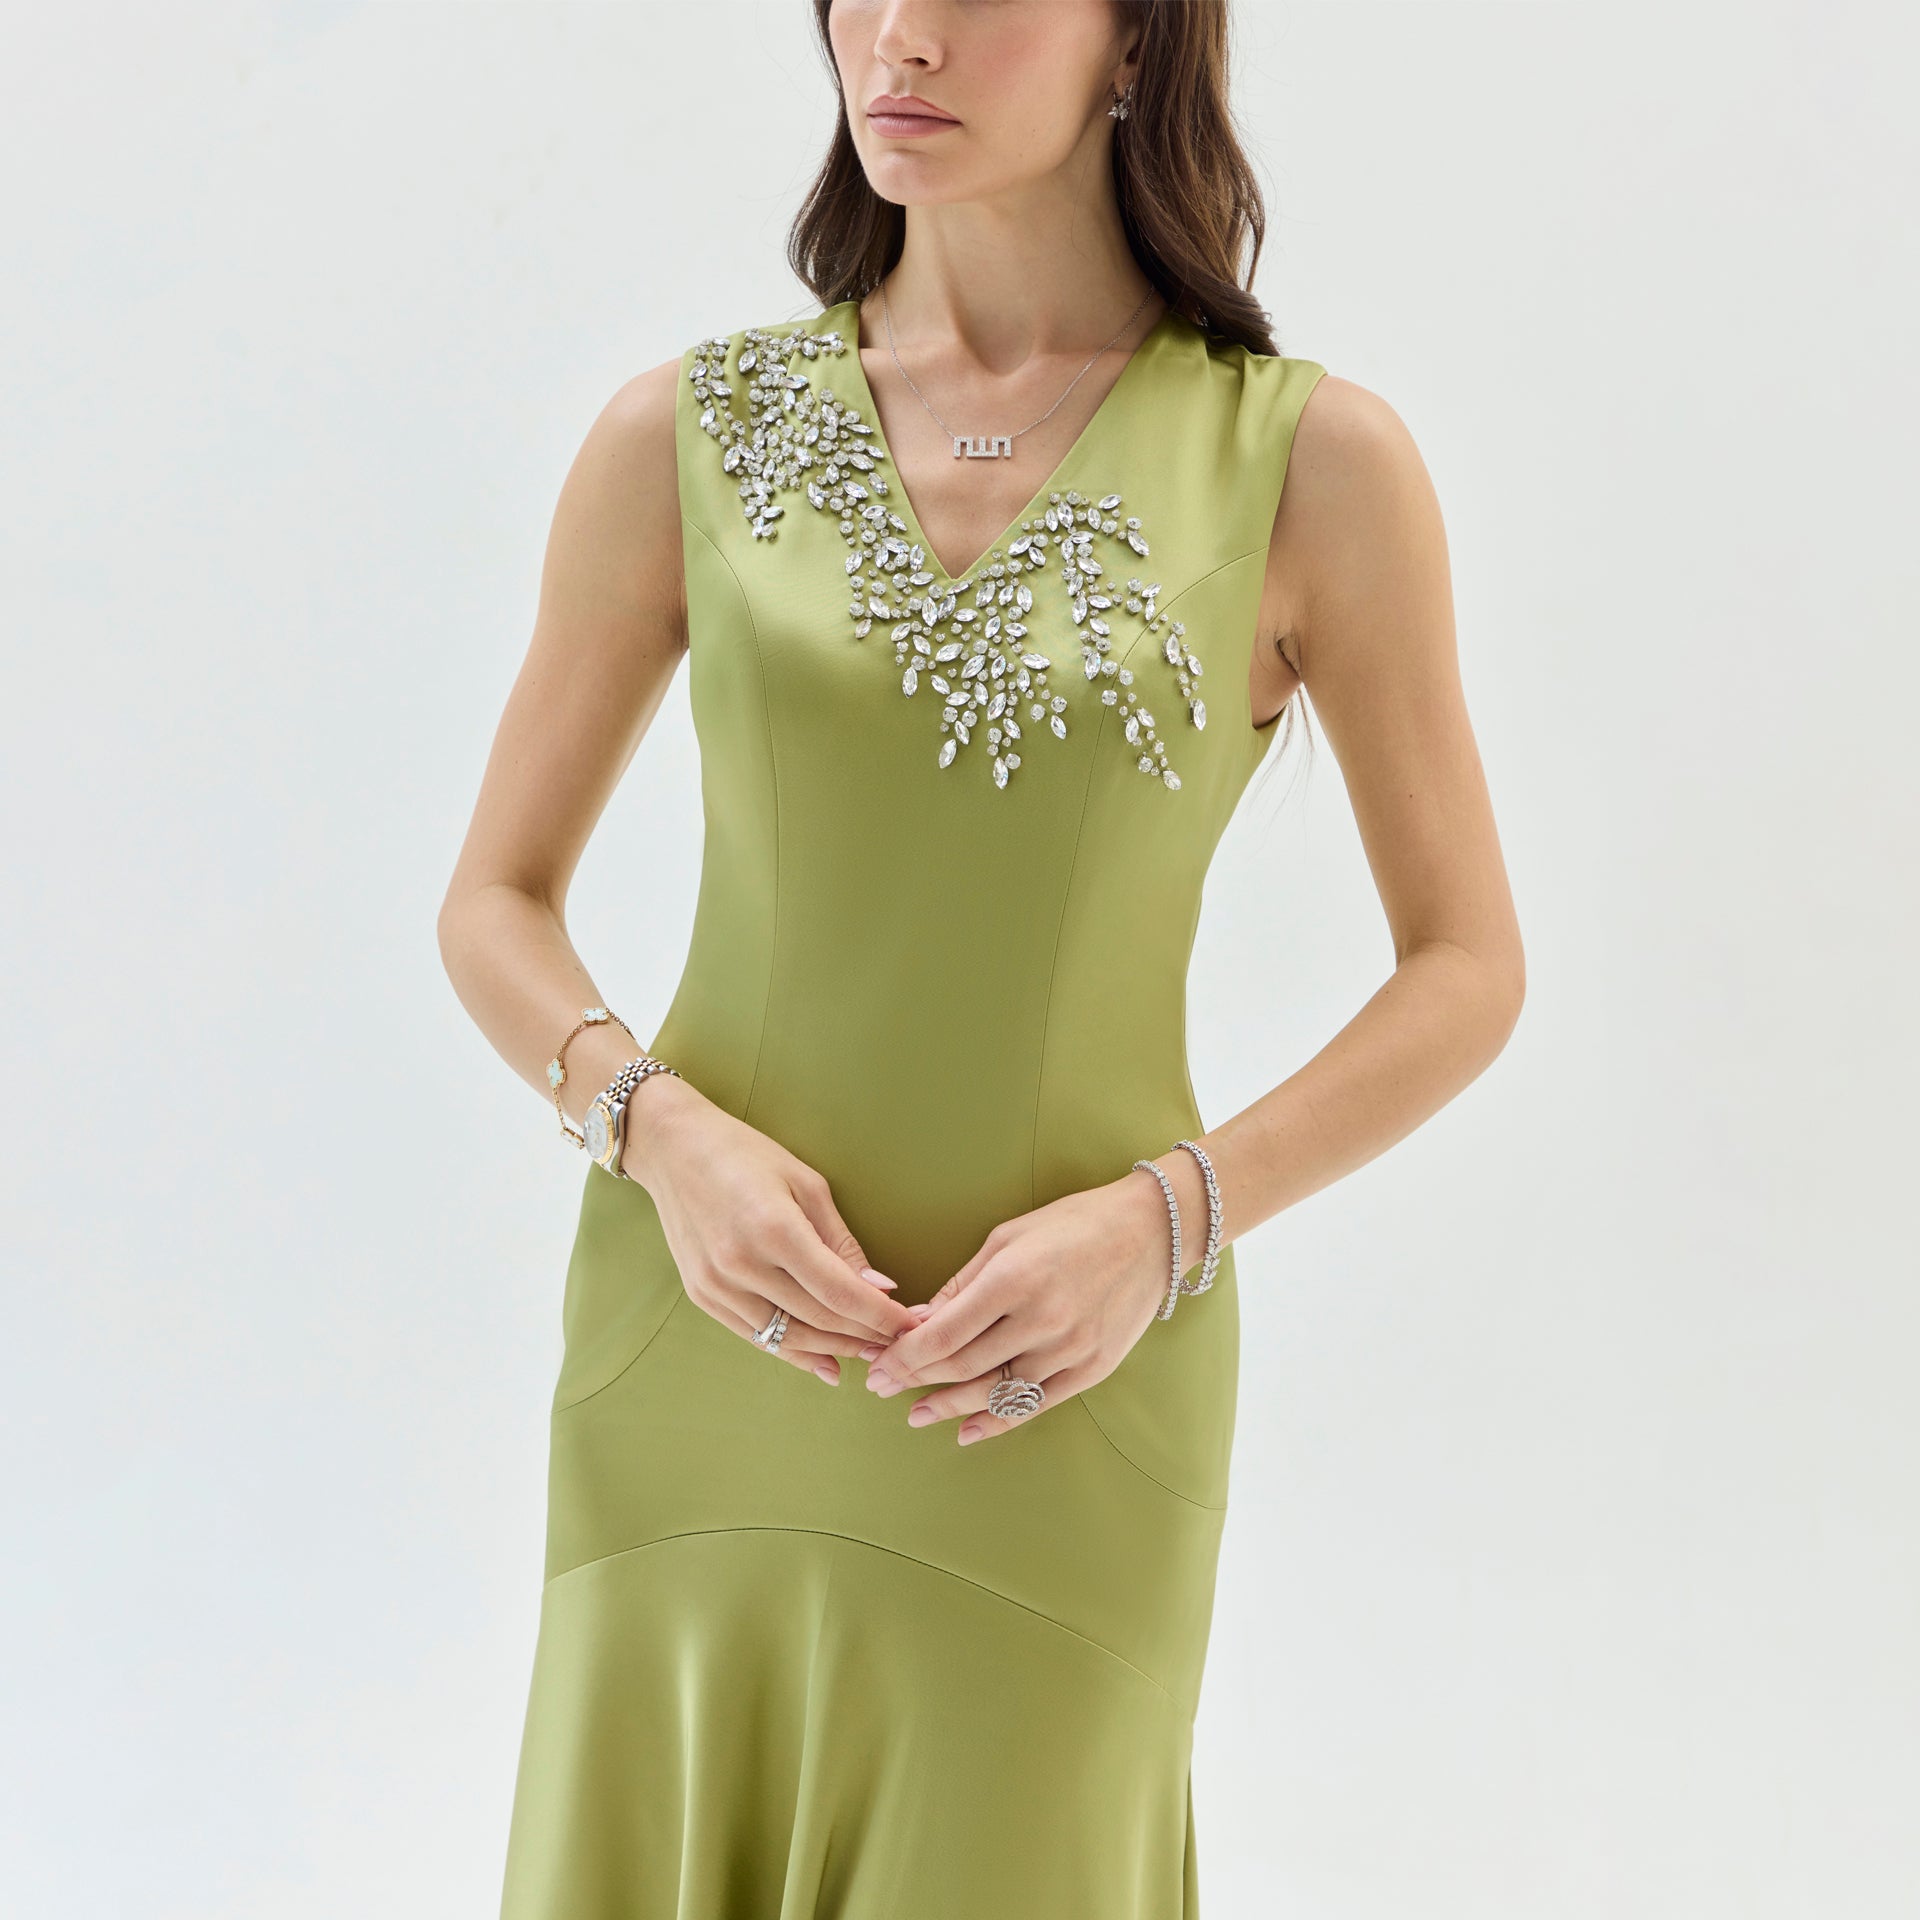 Green Satin Dress with Embroidery By Armoire